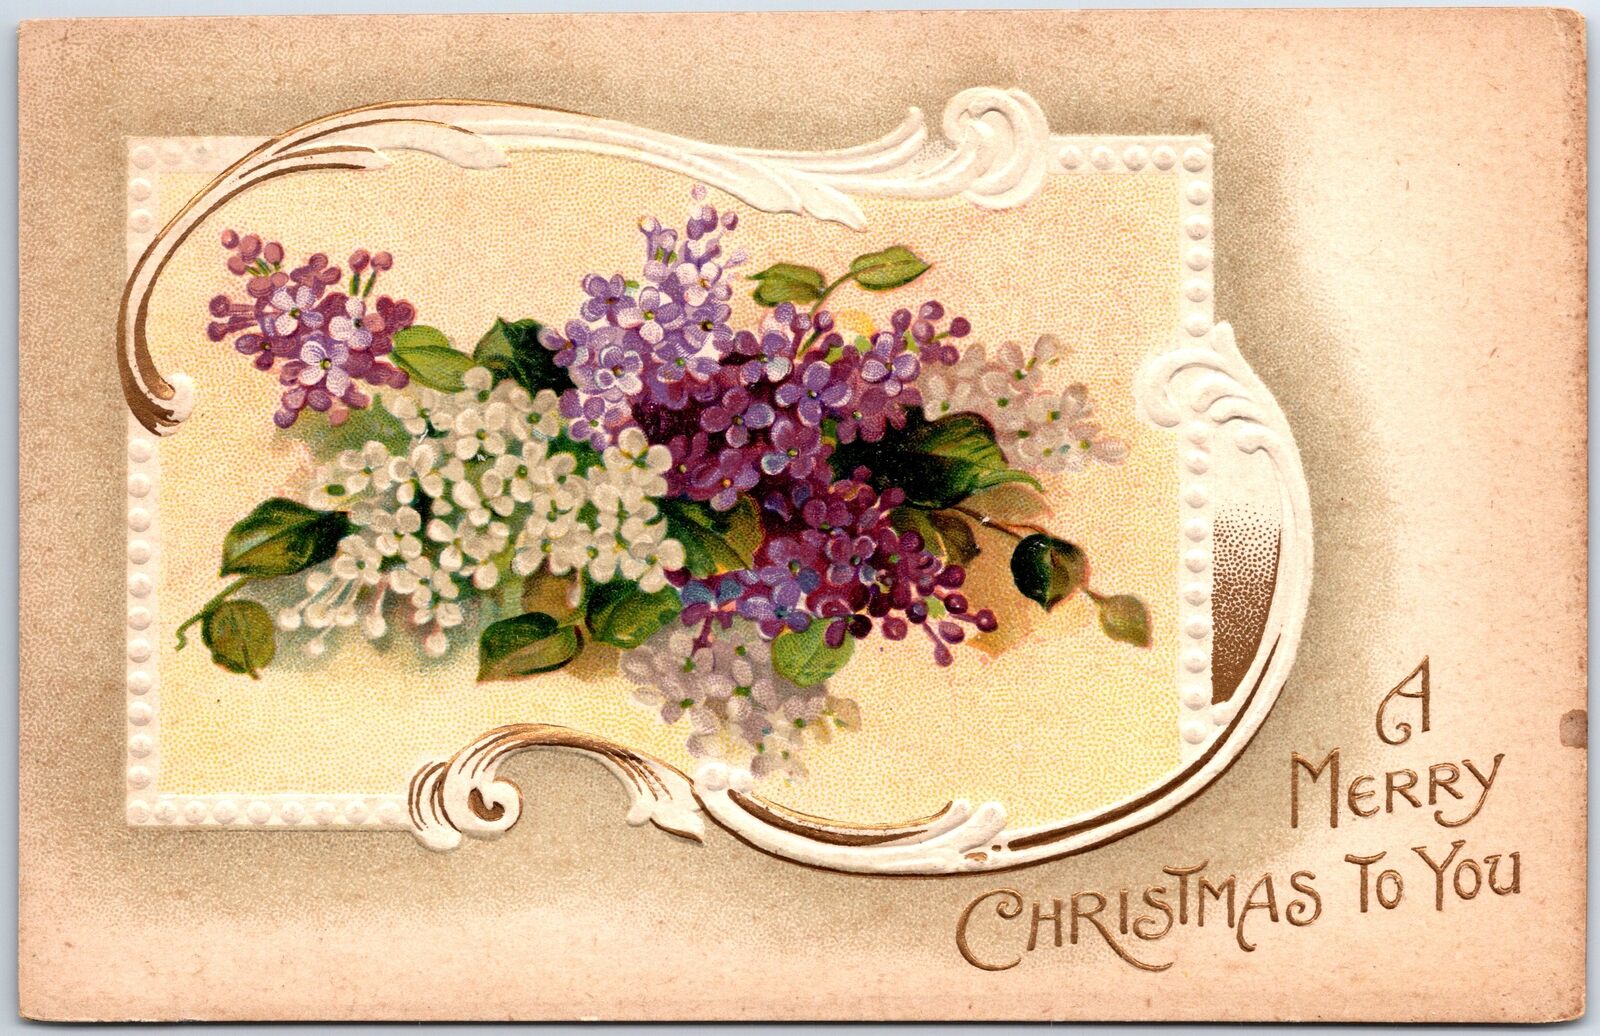 ANTIQUE ORNAMENTAL POSTCARD WITH CHRISTMAS GREETINGS (1910s - 1920s) Stock #G570